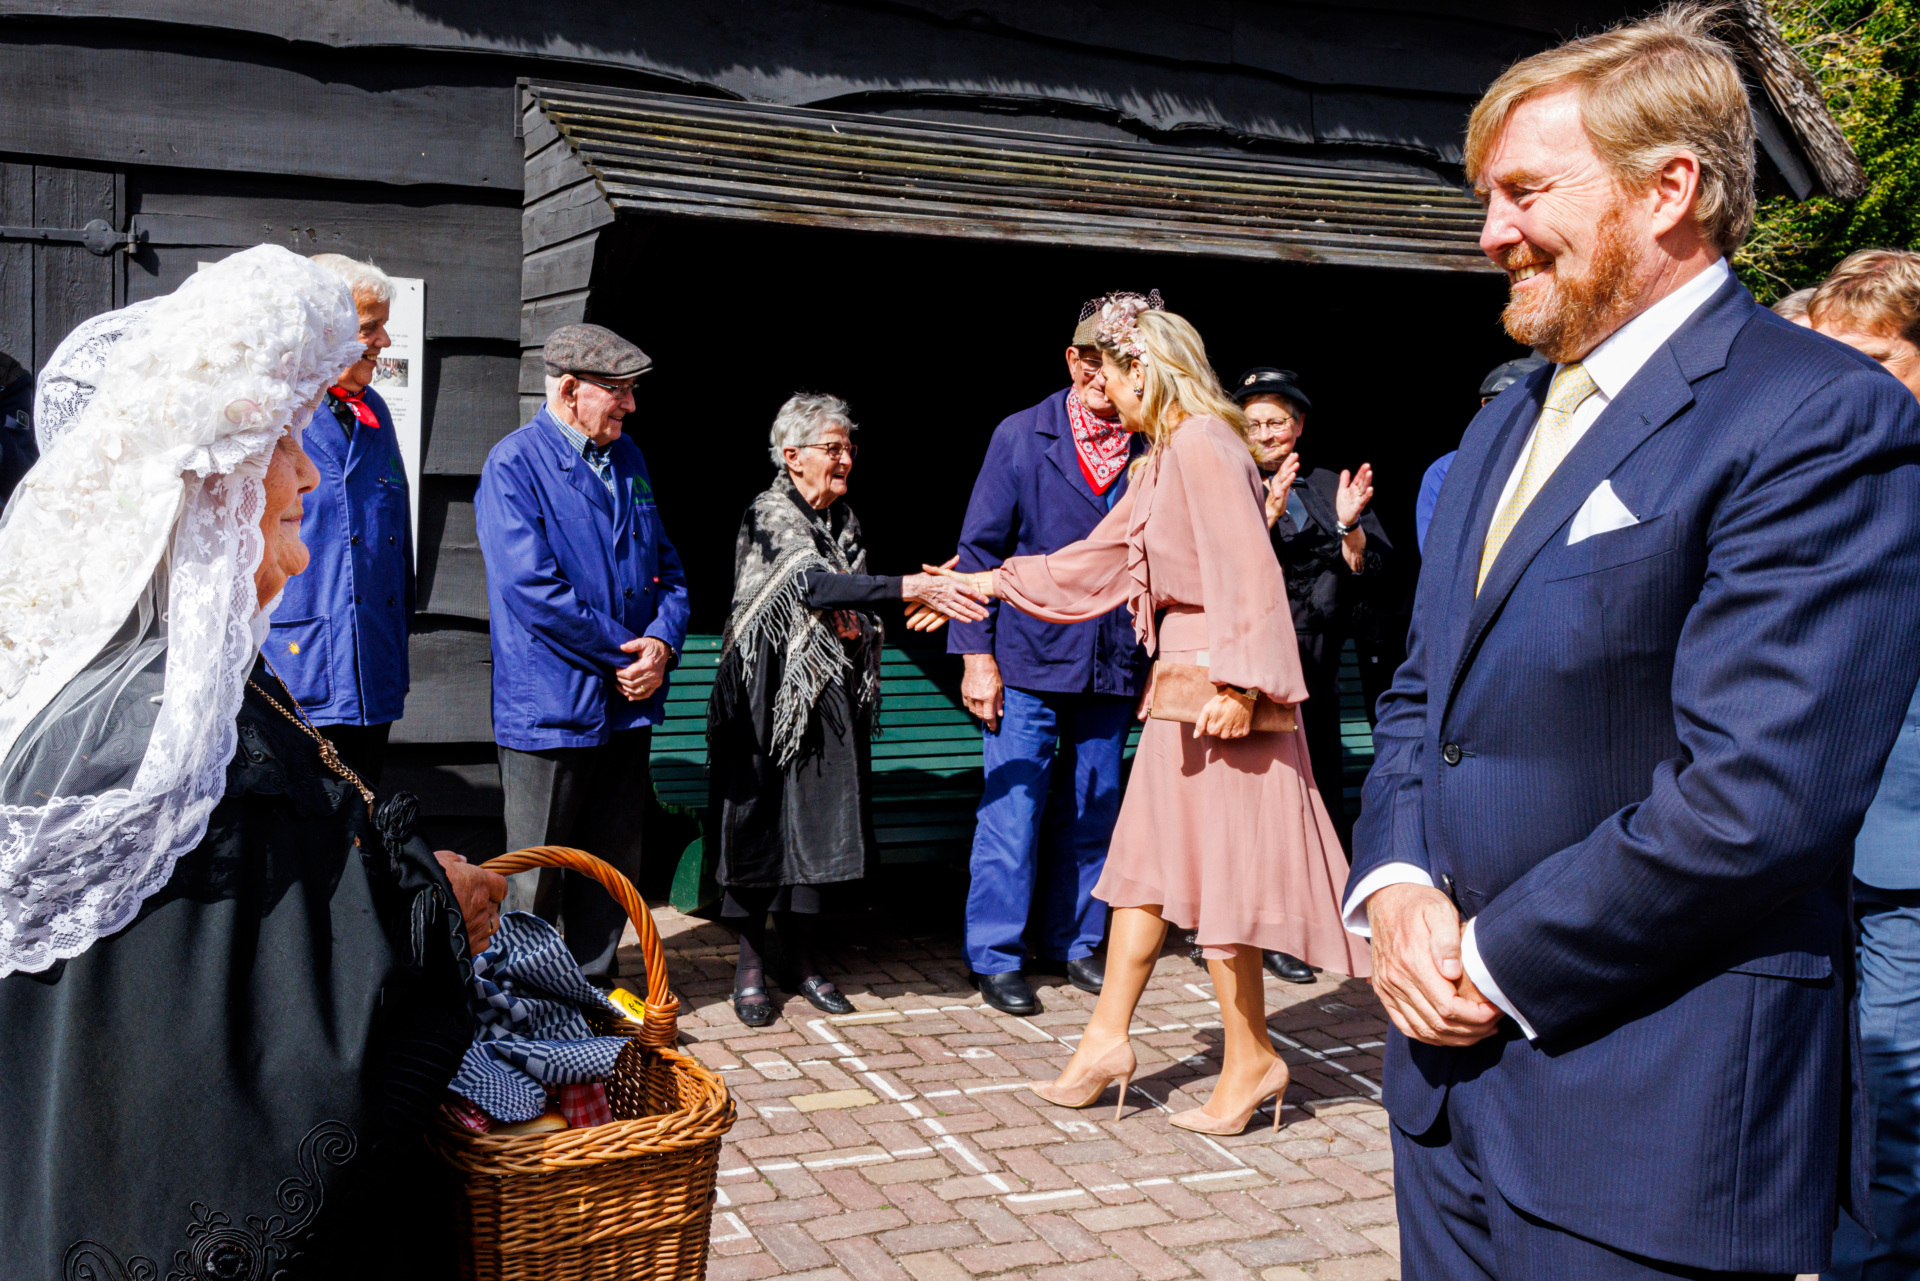 DEURNE, NETHERLANDS - SEPTEMBER 15: King Willem-Alexander of The Netherlands and Queen Maxima visit the Farmers Museum during the King and Queen's visit to the Peel region on September 15, 2022 in Deurne, Netherlands. (Photo by Patrick van Katwijk/Getty Images)